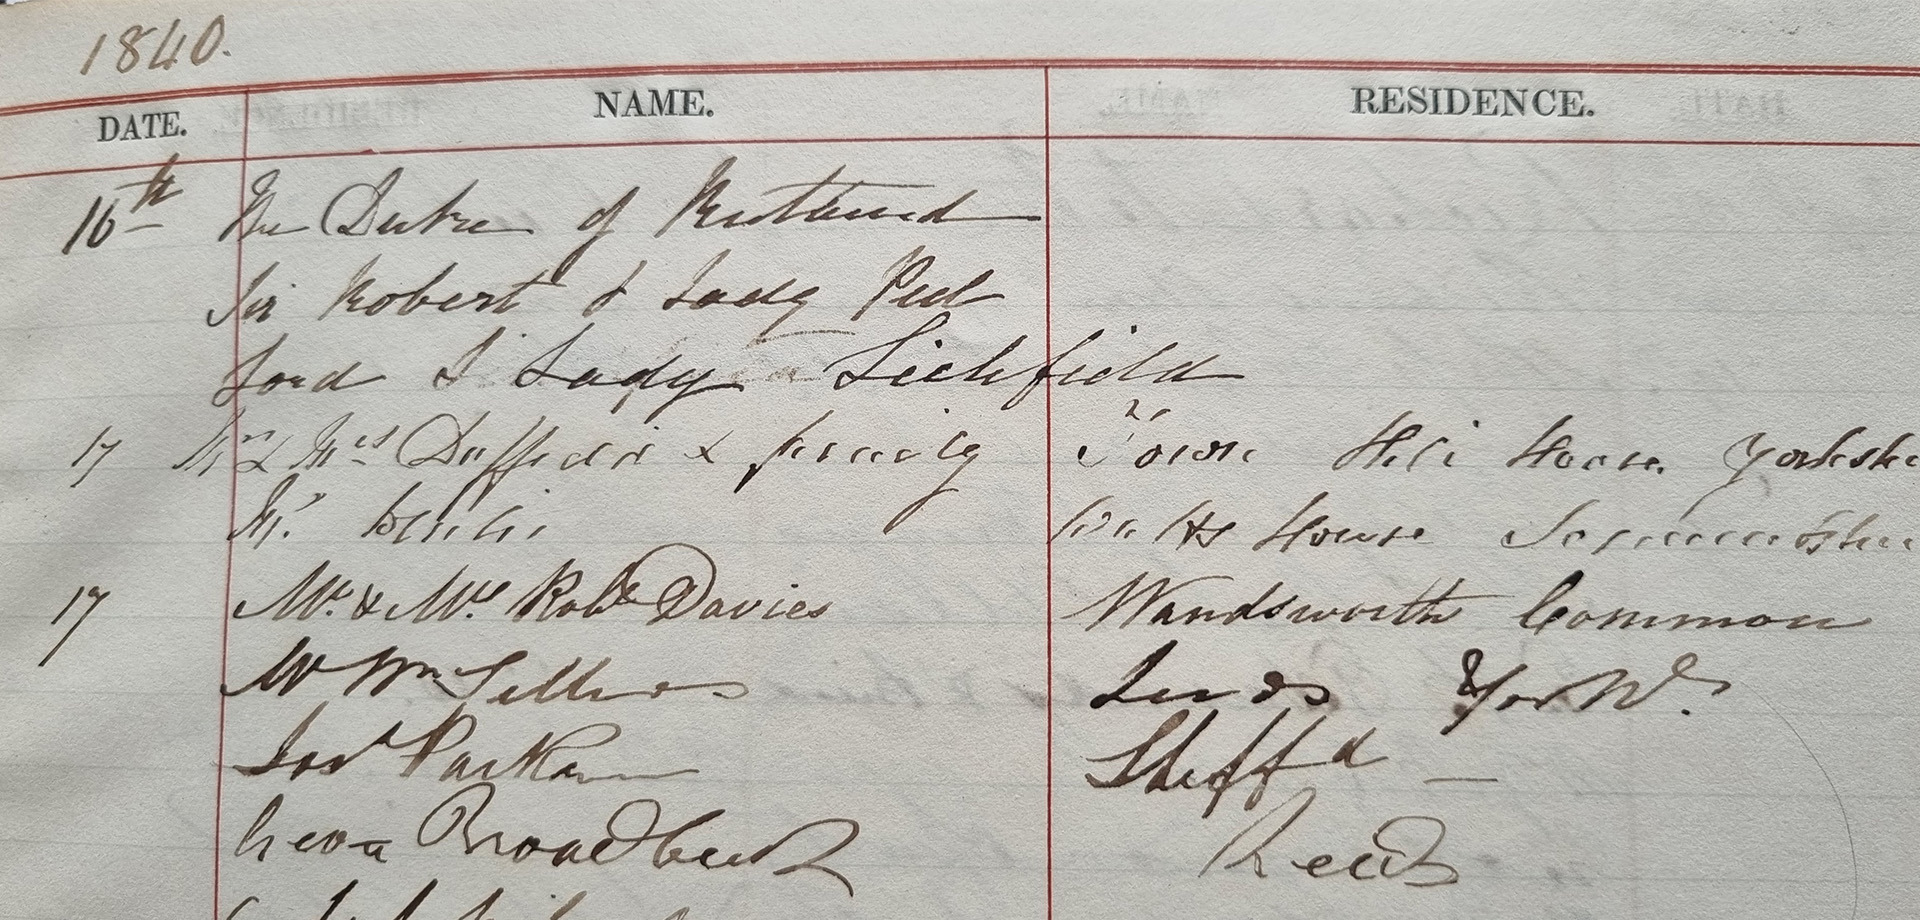 Robert Peel entry in the Chatsworth visitor book